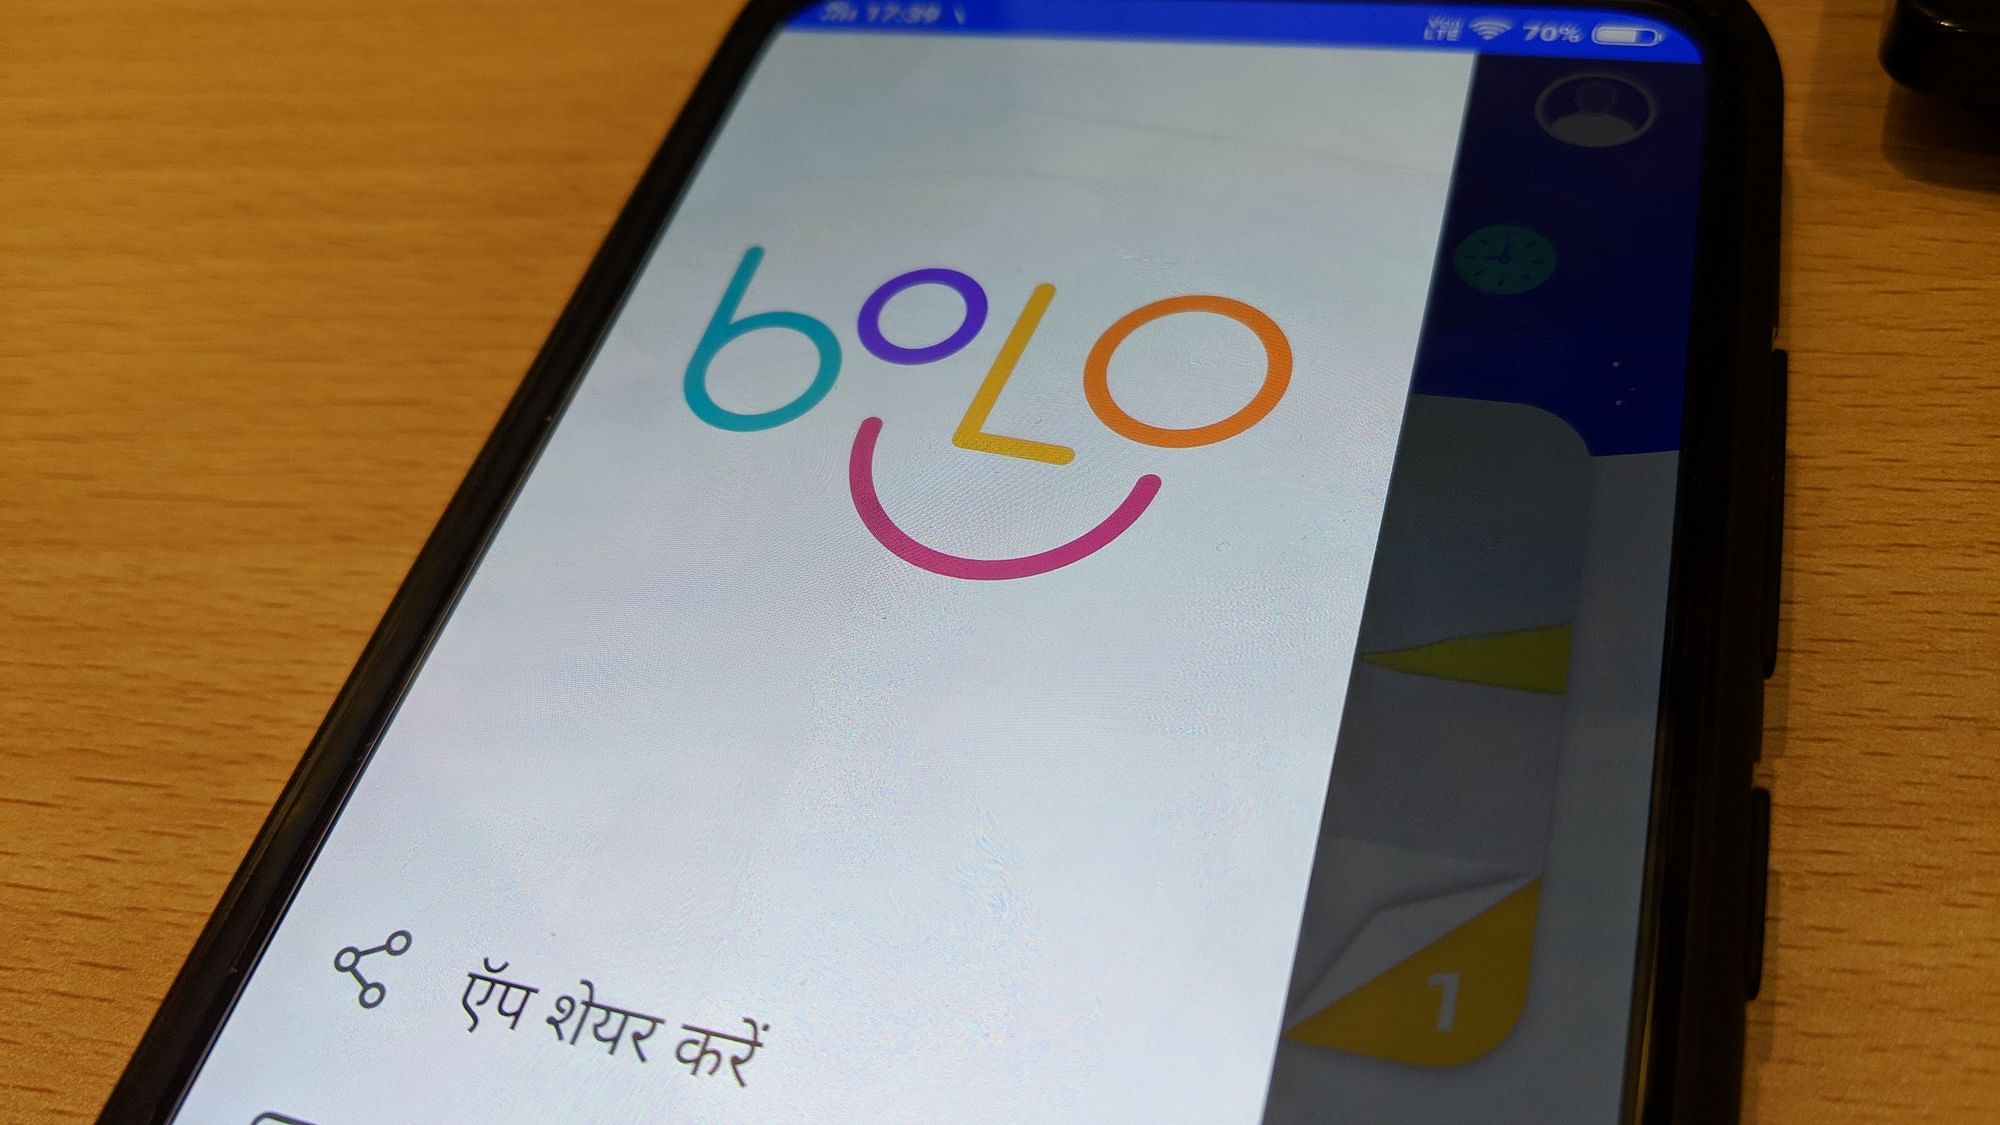 Google Bolo app has been made for consumers in India.